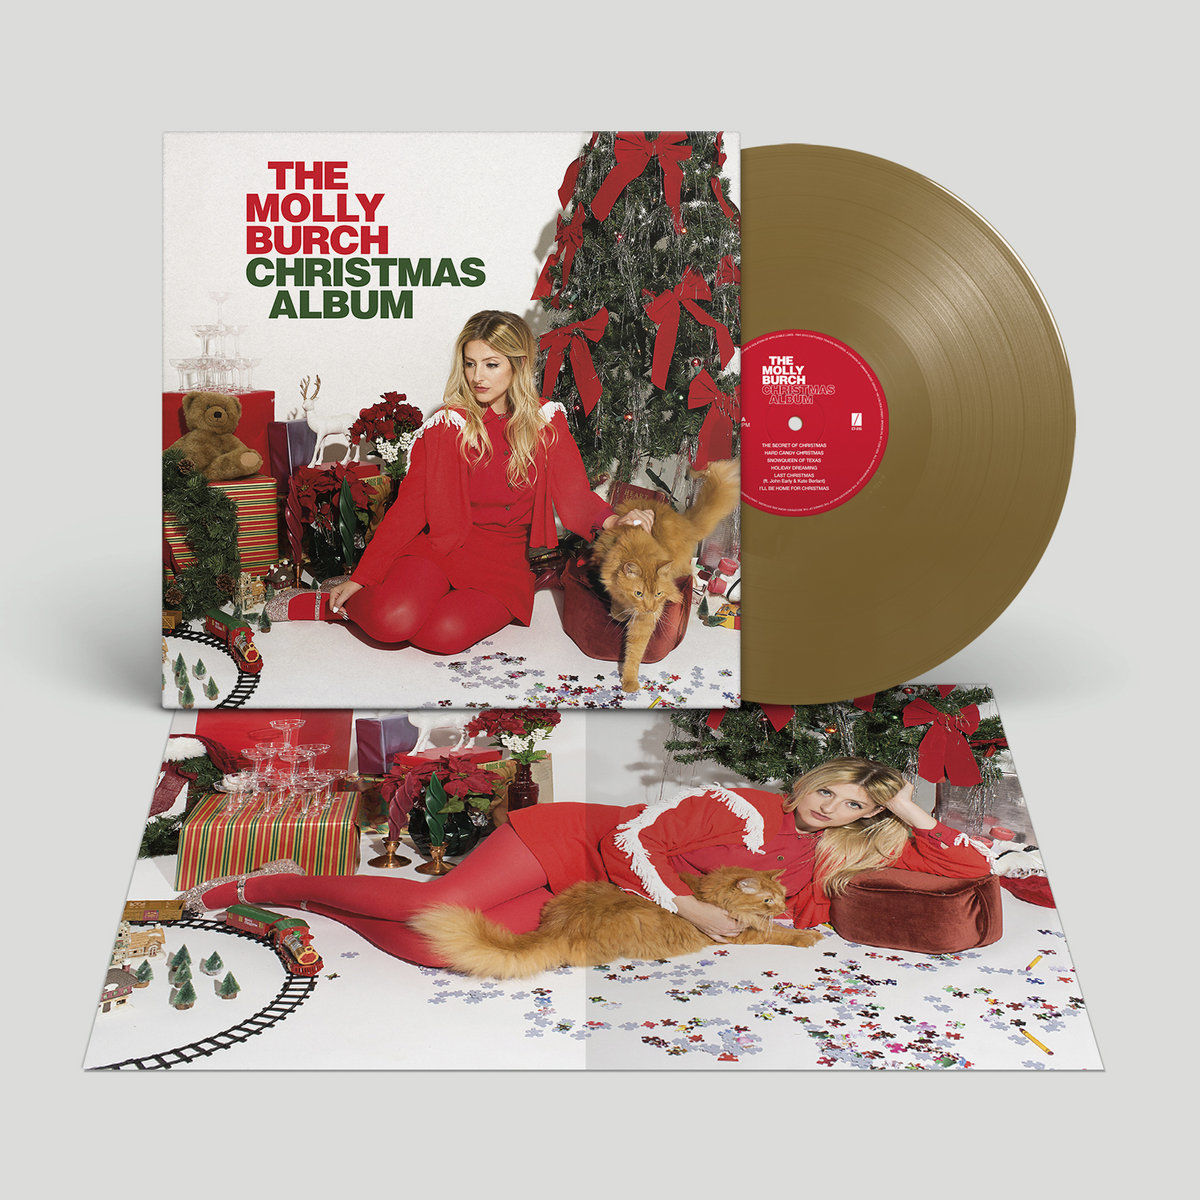 The Molly Burch Christmas Album: Limited Edition Gold Vinyl LP